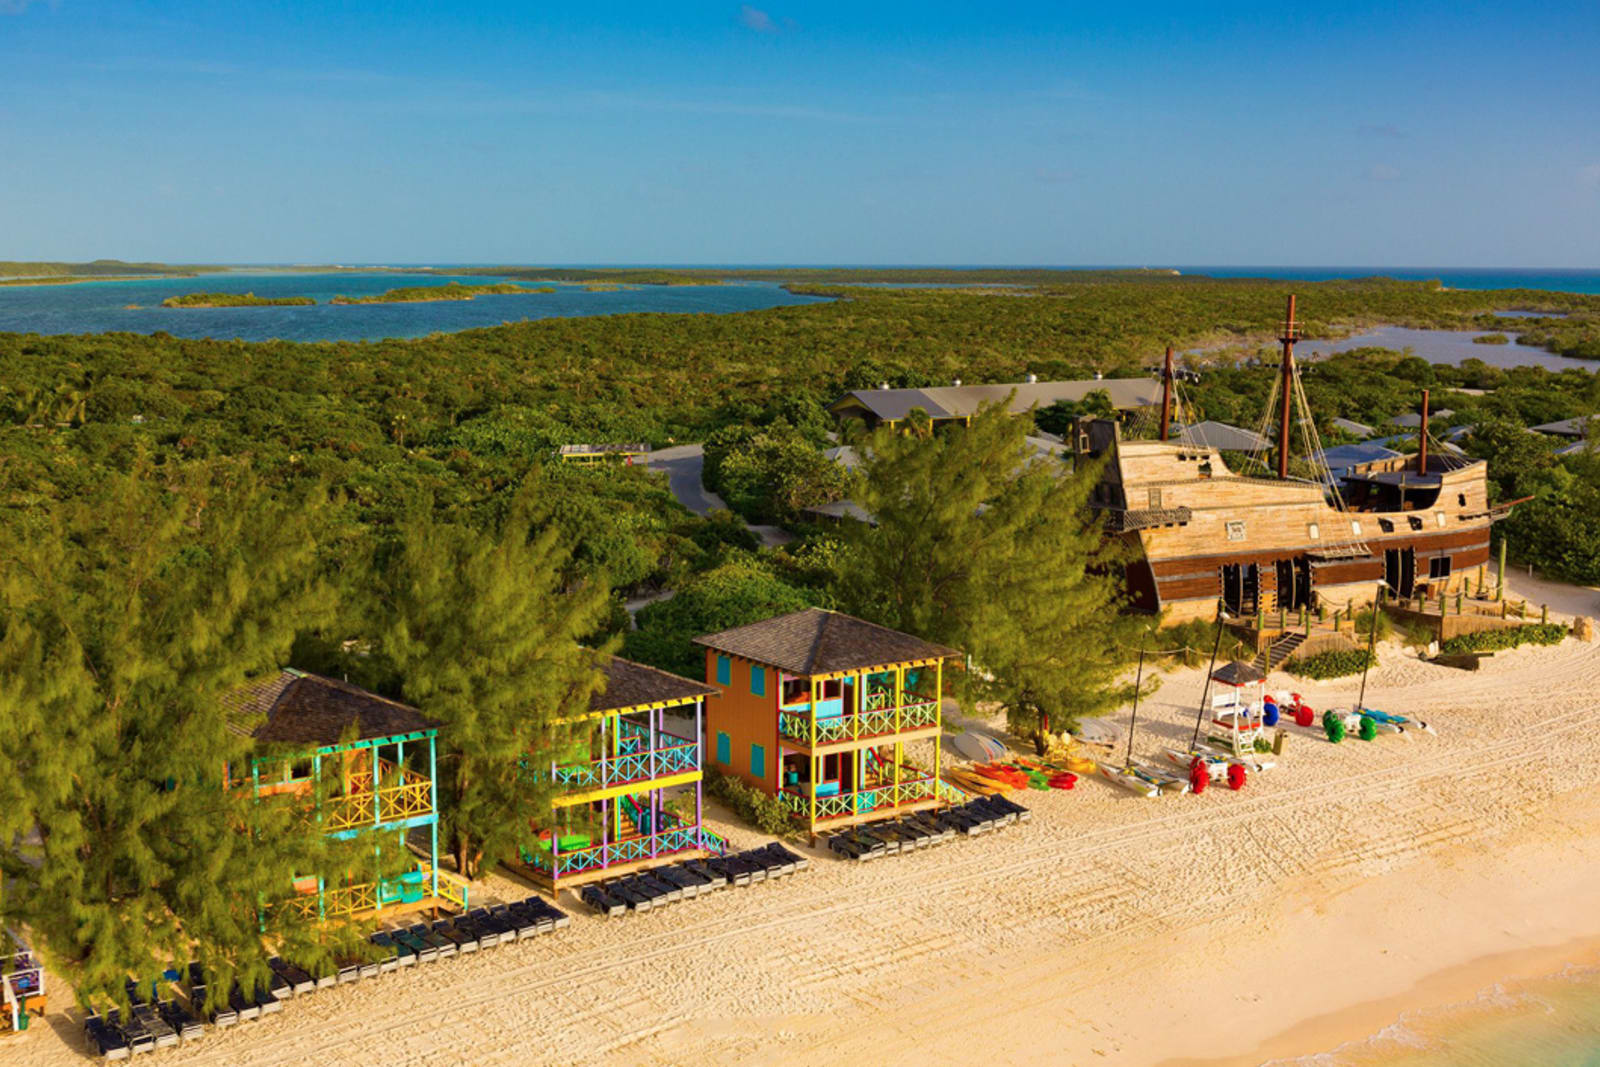 At Half Moon Cay, cruise passengers can relax in private beachfront villas